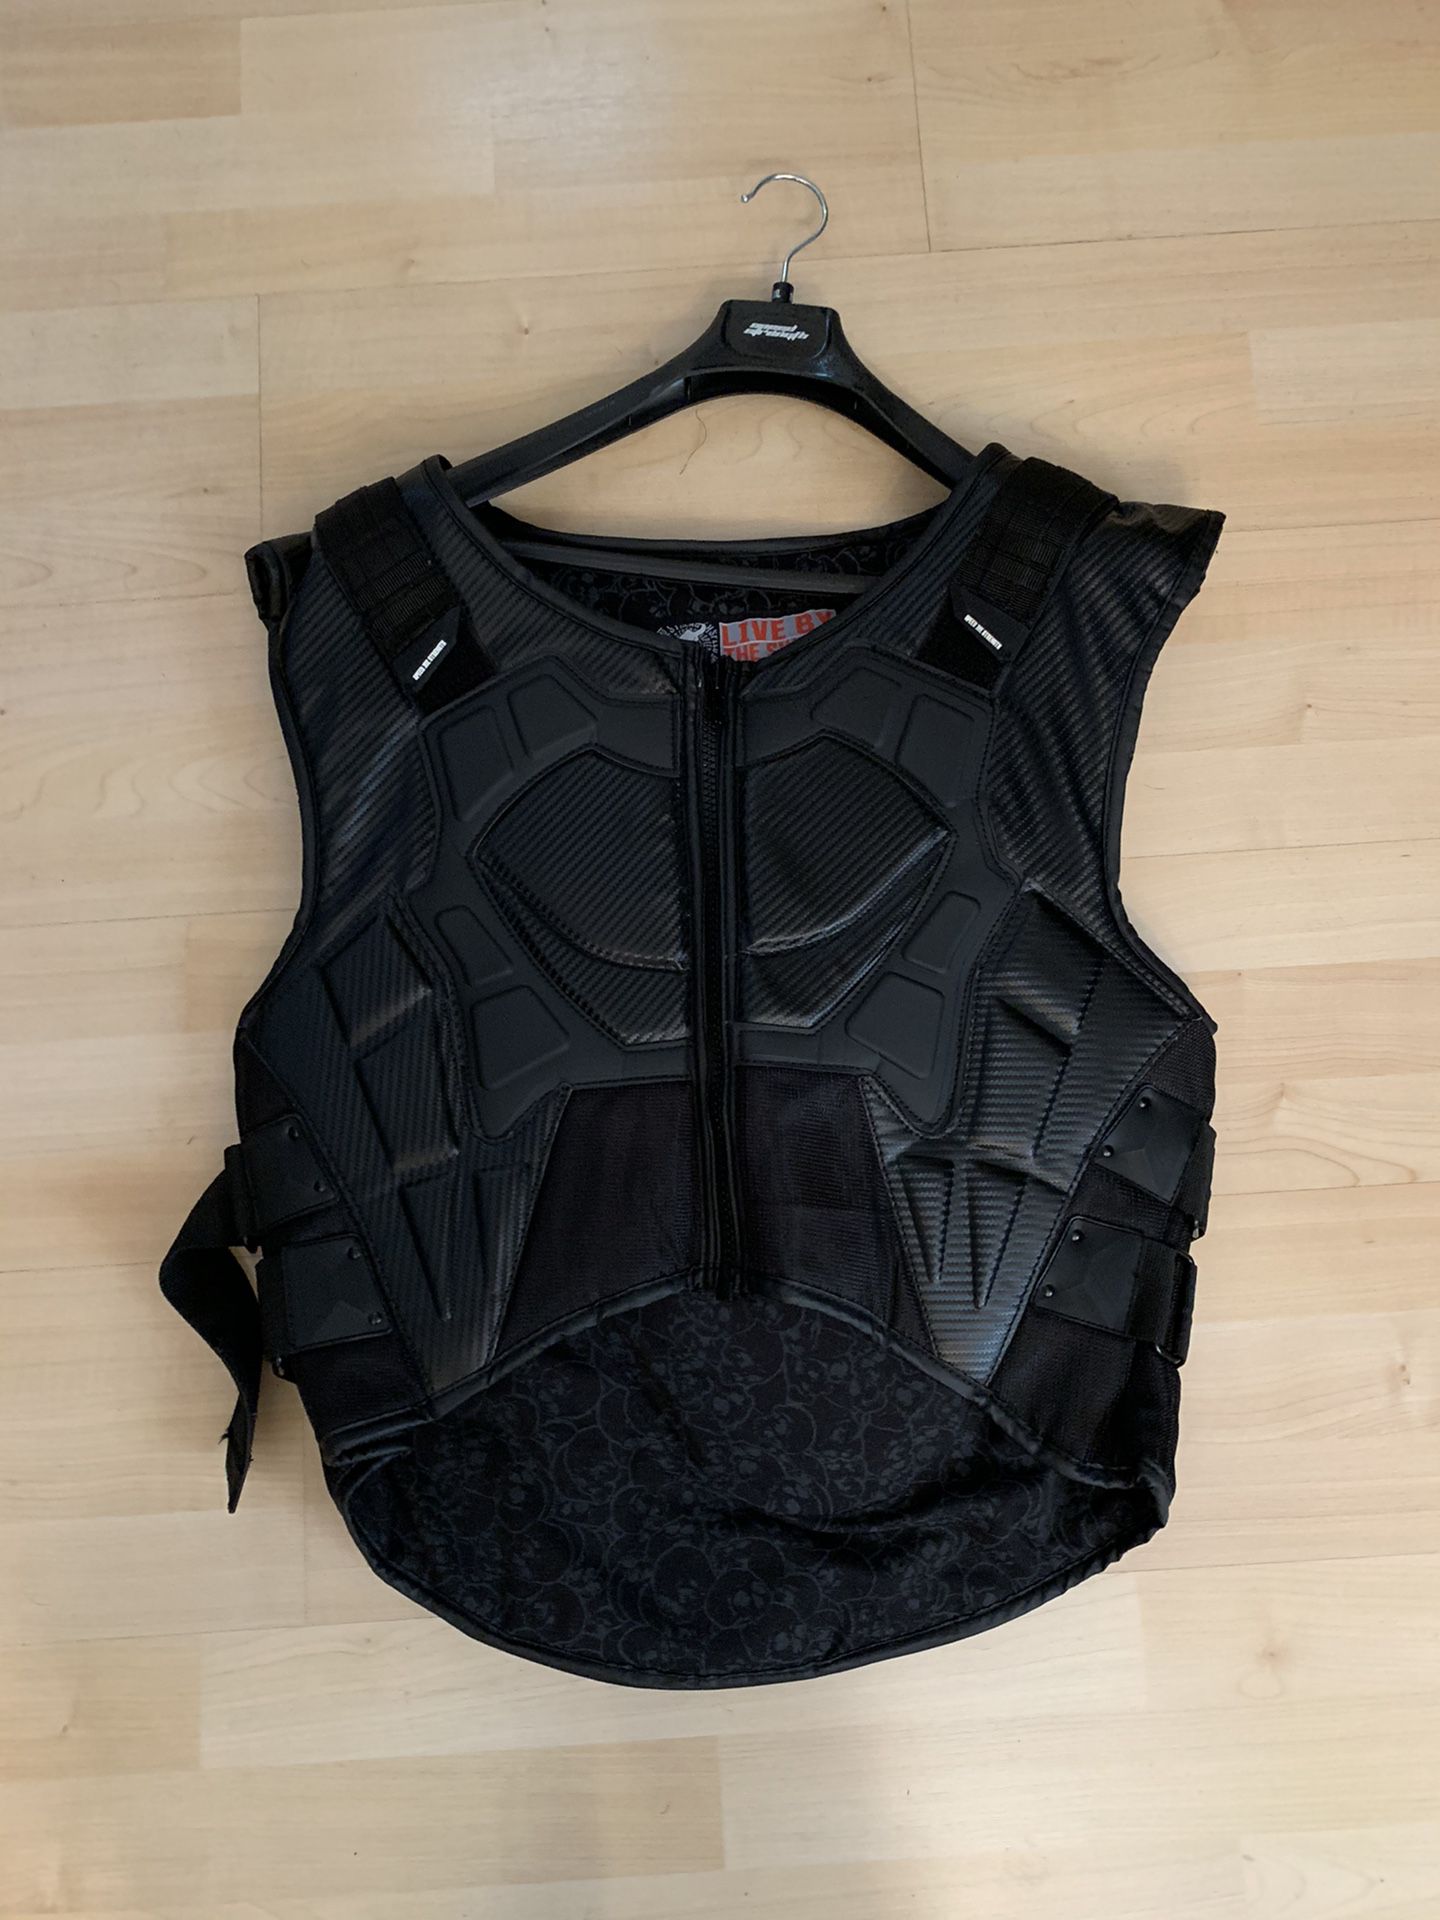 New men’s speed and strength padded motorcycle vest